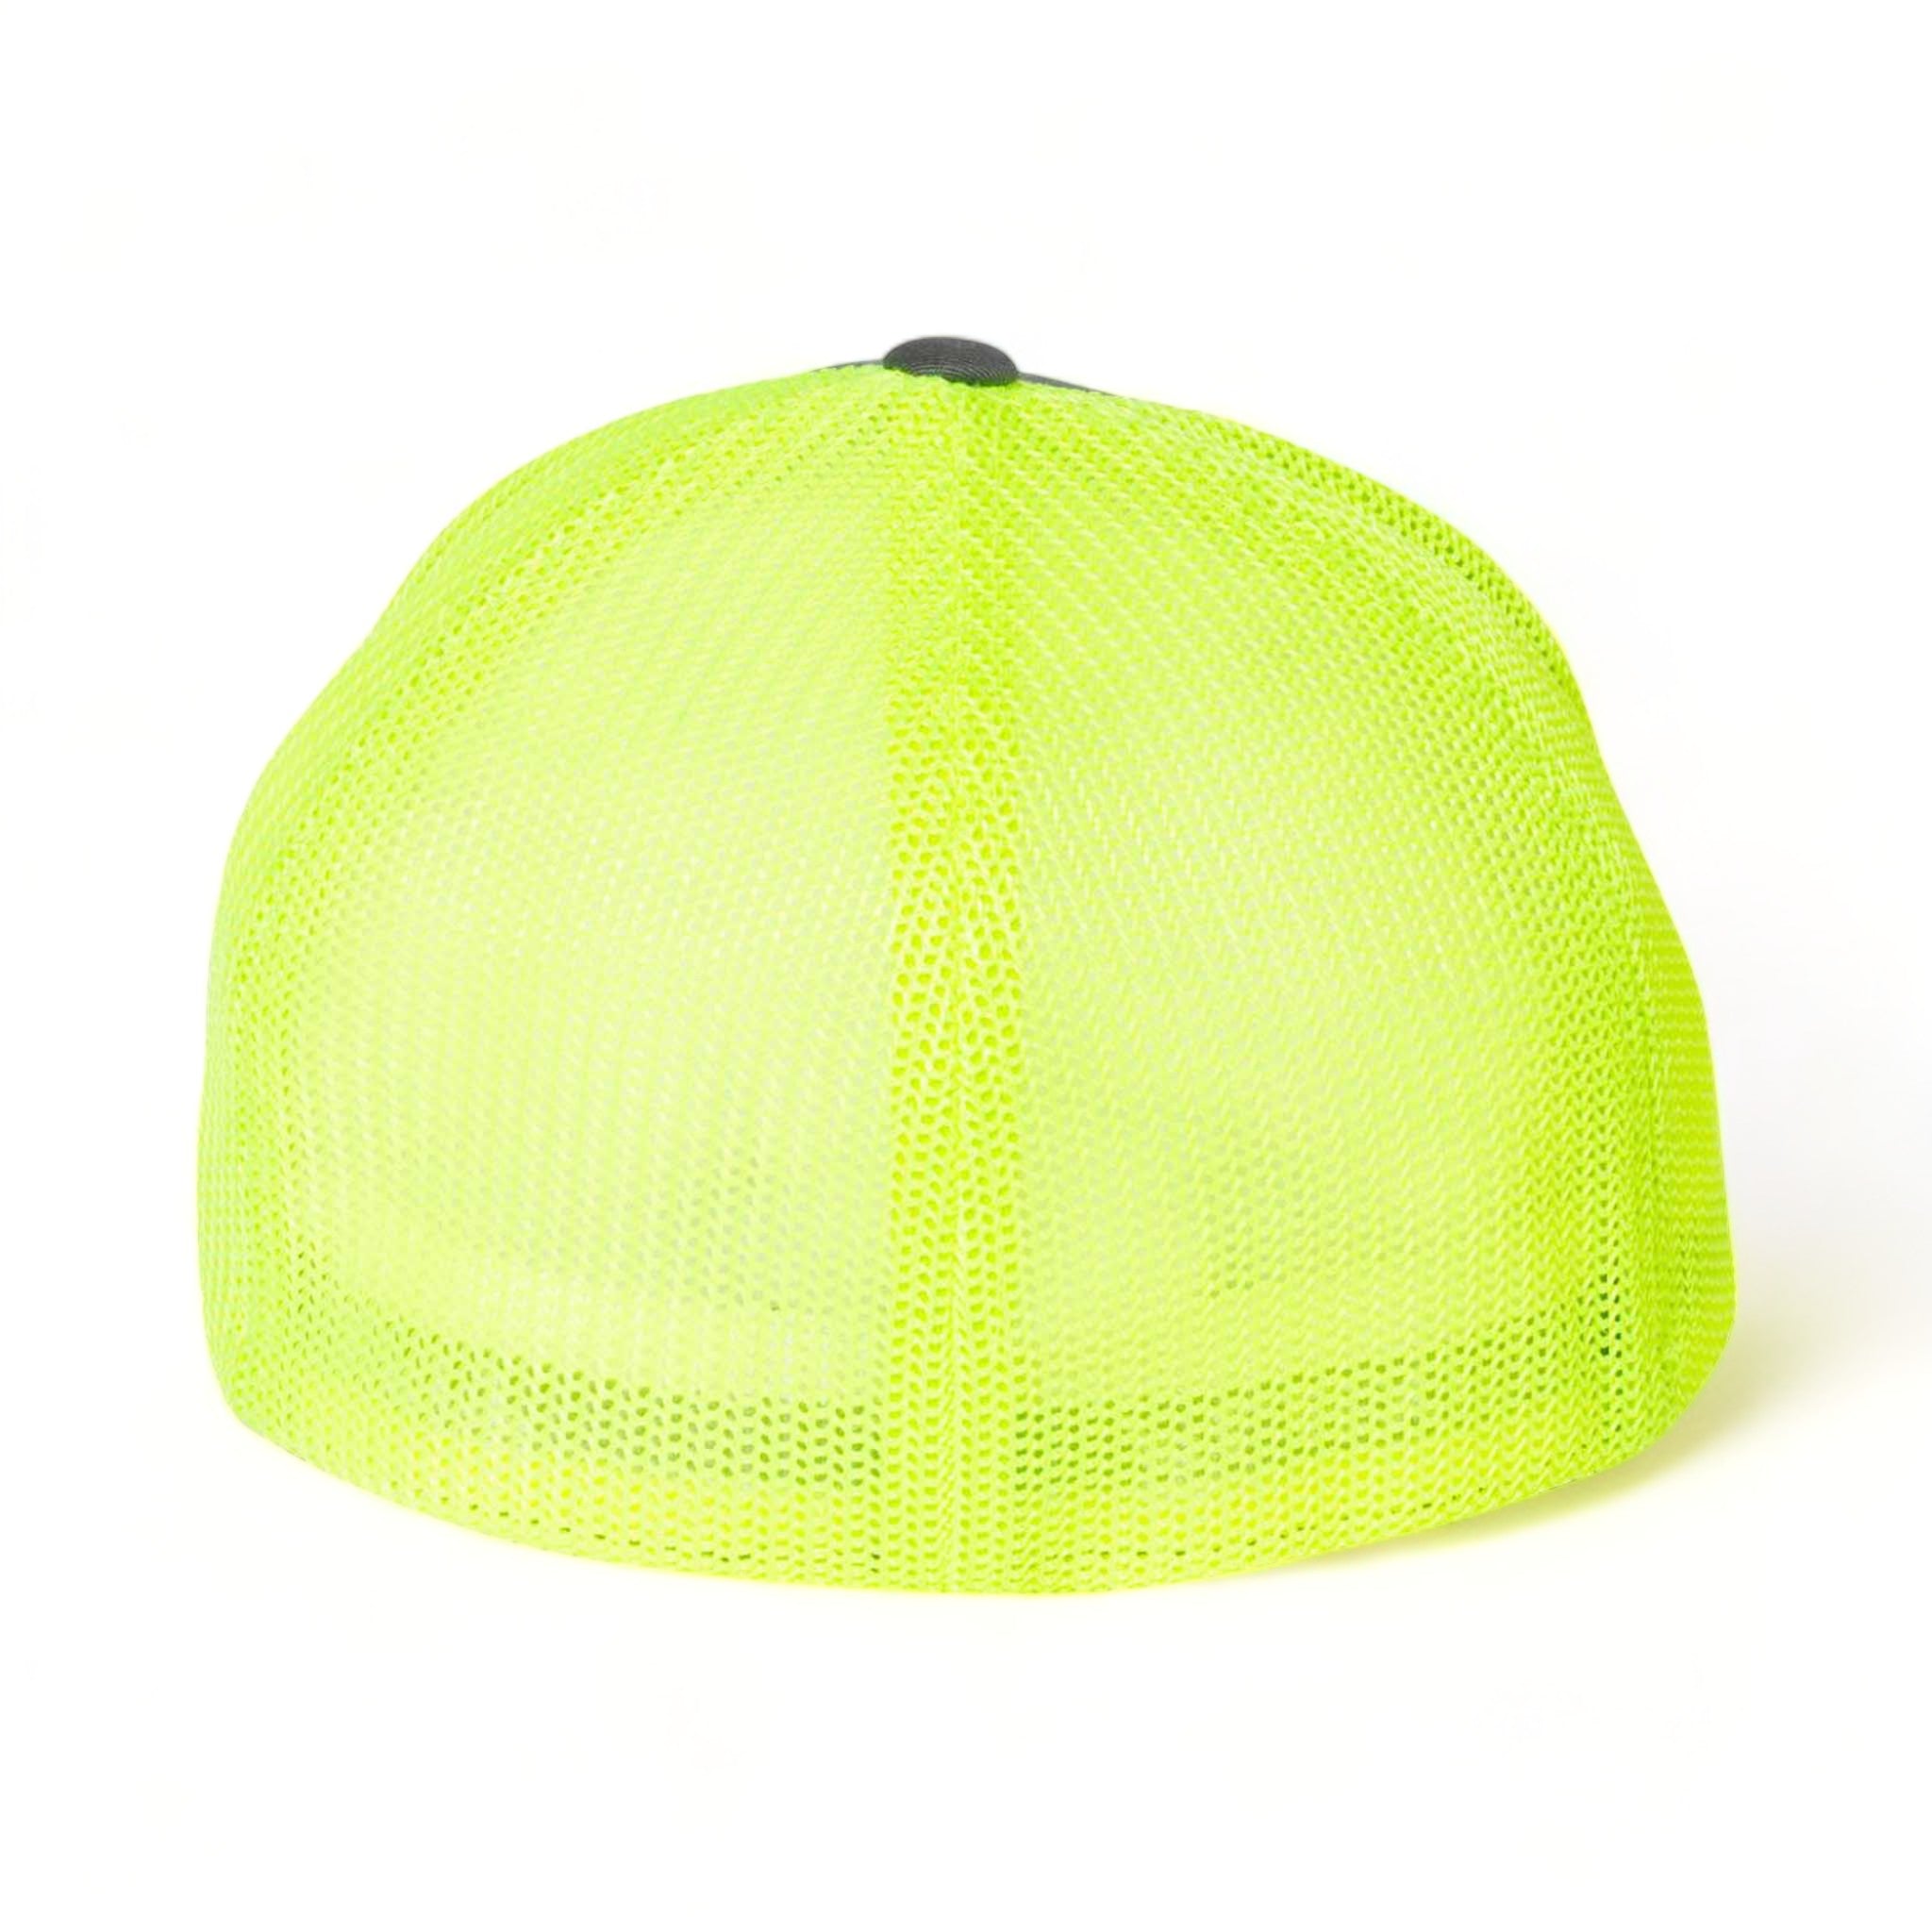 Back view of Flexfit 6511 custom hat in charcoal and neon yellow